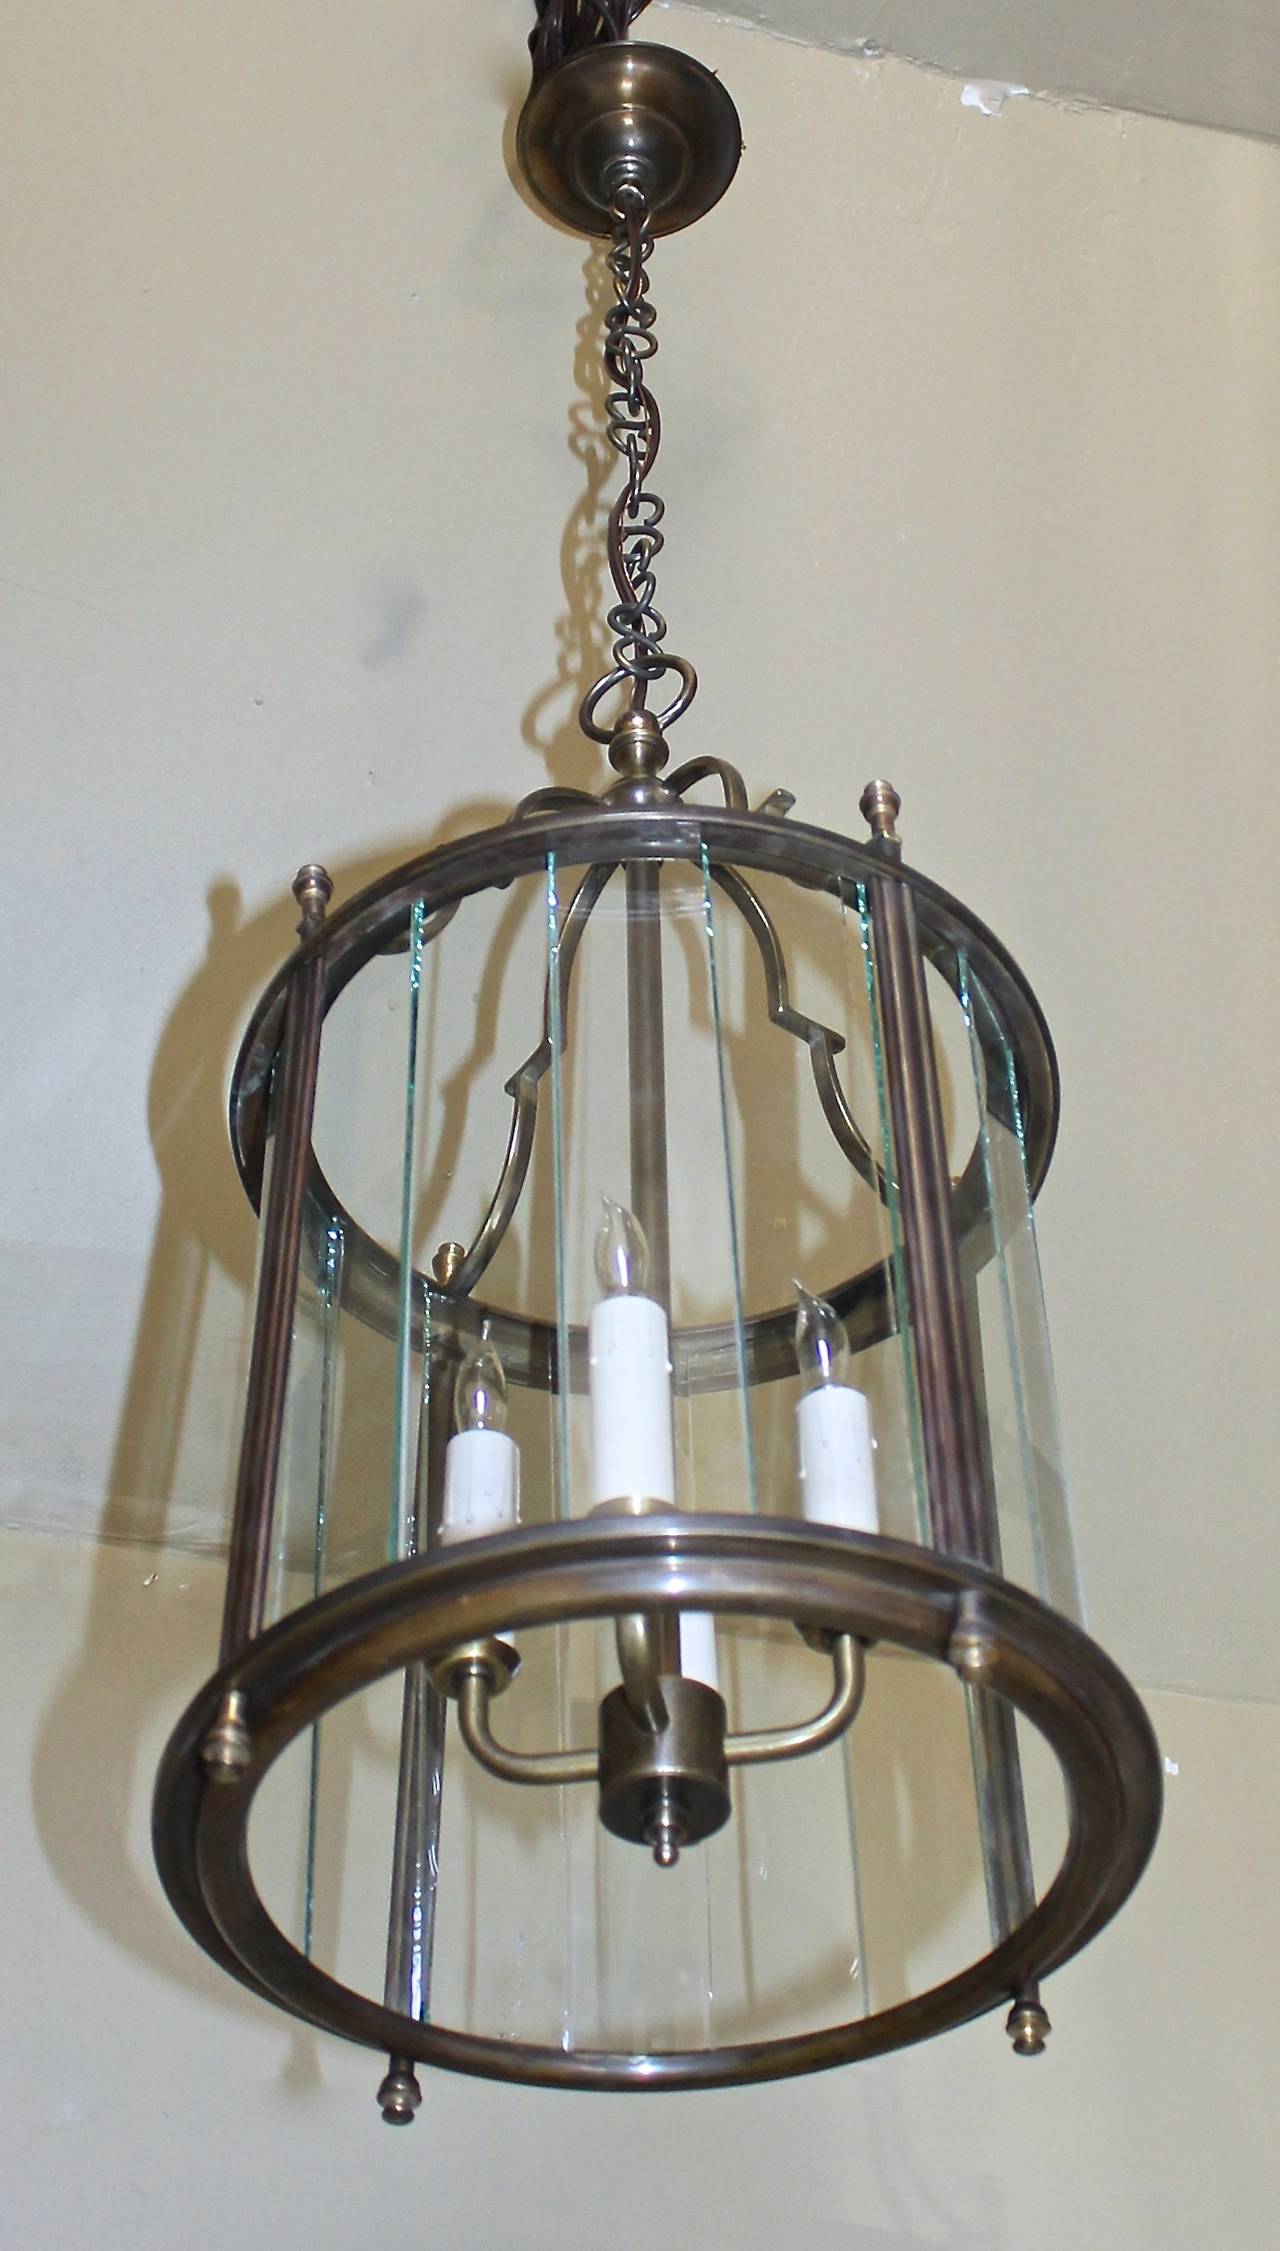 Italian brass Neoclassic brass hall lantern with segmented glass panels. Uses 4 - 40 watt max candelabra base bulbs, newly wired for US. Fixture 11" D x 23" T, total height including chain 40" can be adjusted as needed.

This item is